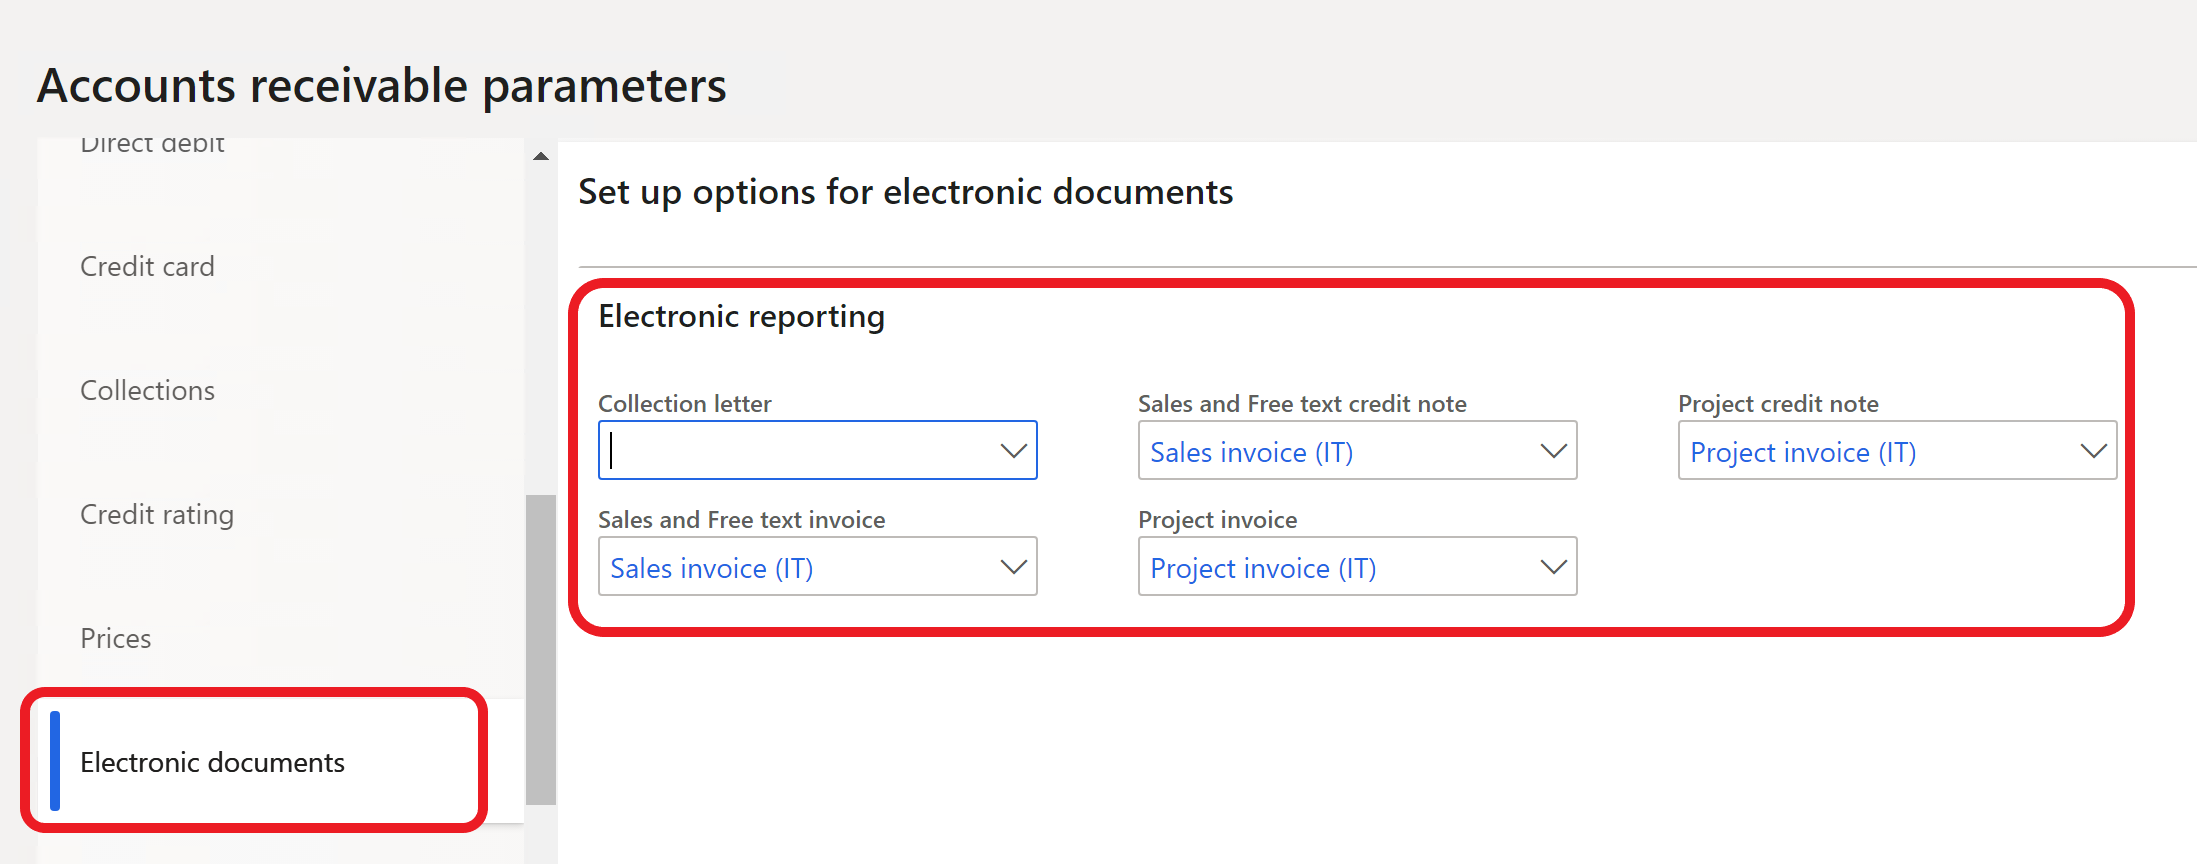 Electronic document tab of the Accounts receivable parameters page.